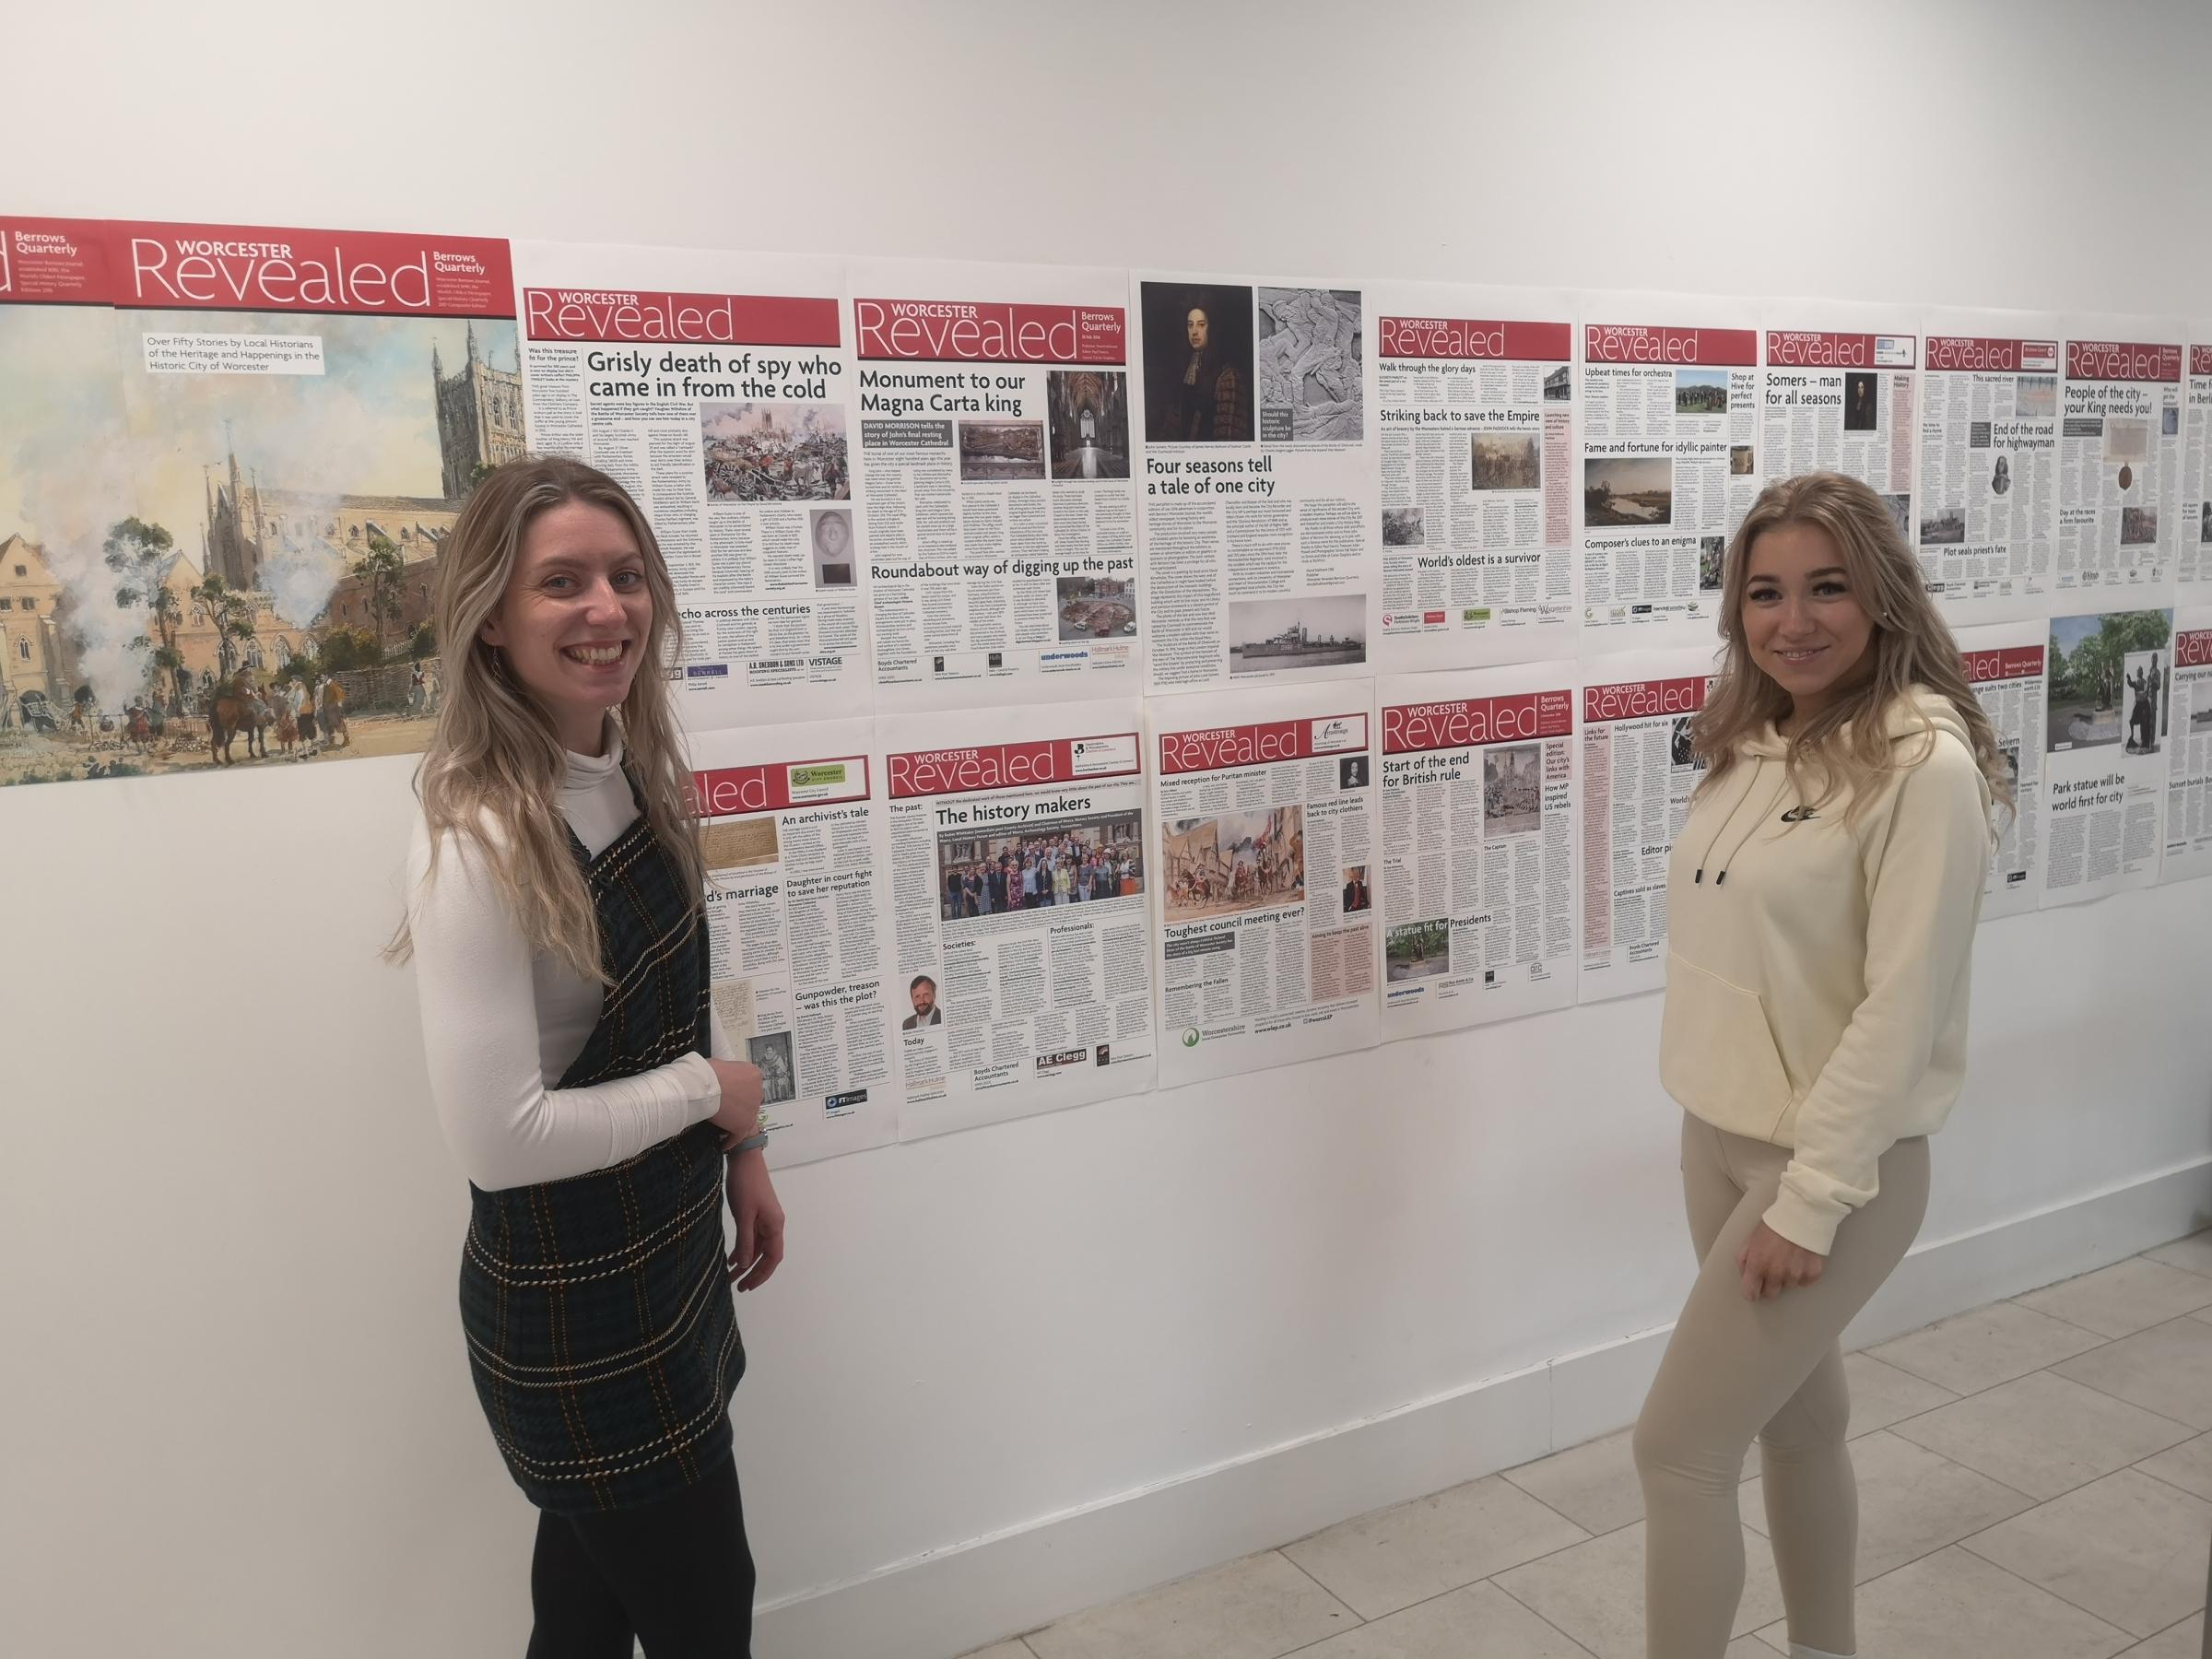 Students Georgia Davis(right) and Charlotte Taylor with the Worcester Revealed display at the Pod, which covers interesting happenings ancient and modern